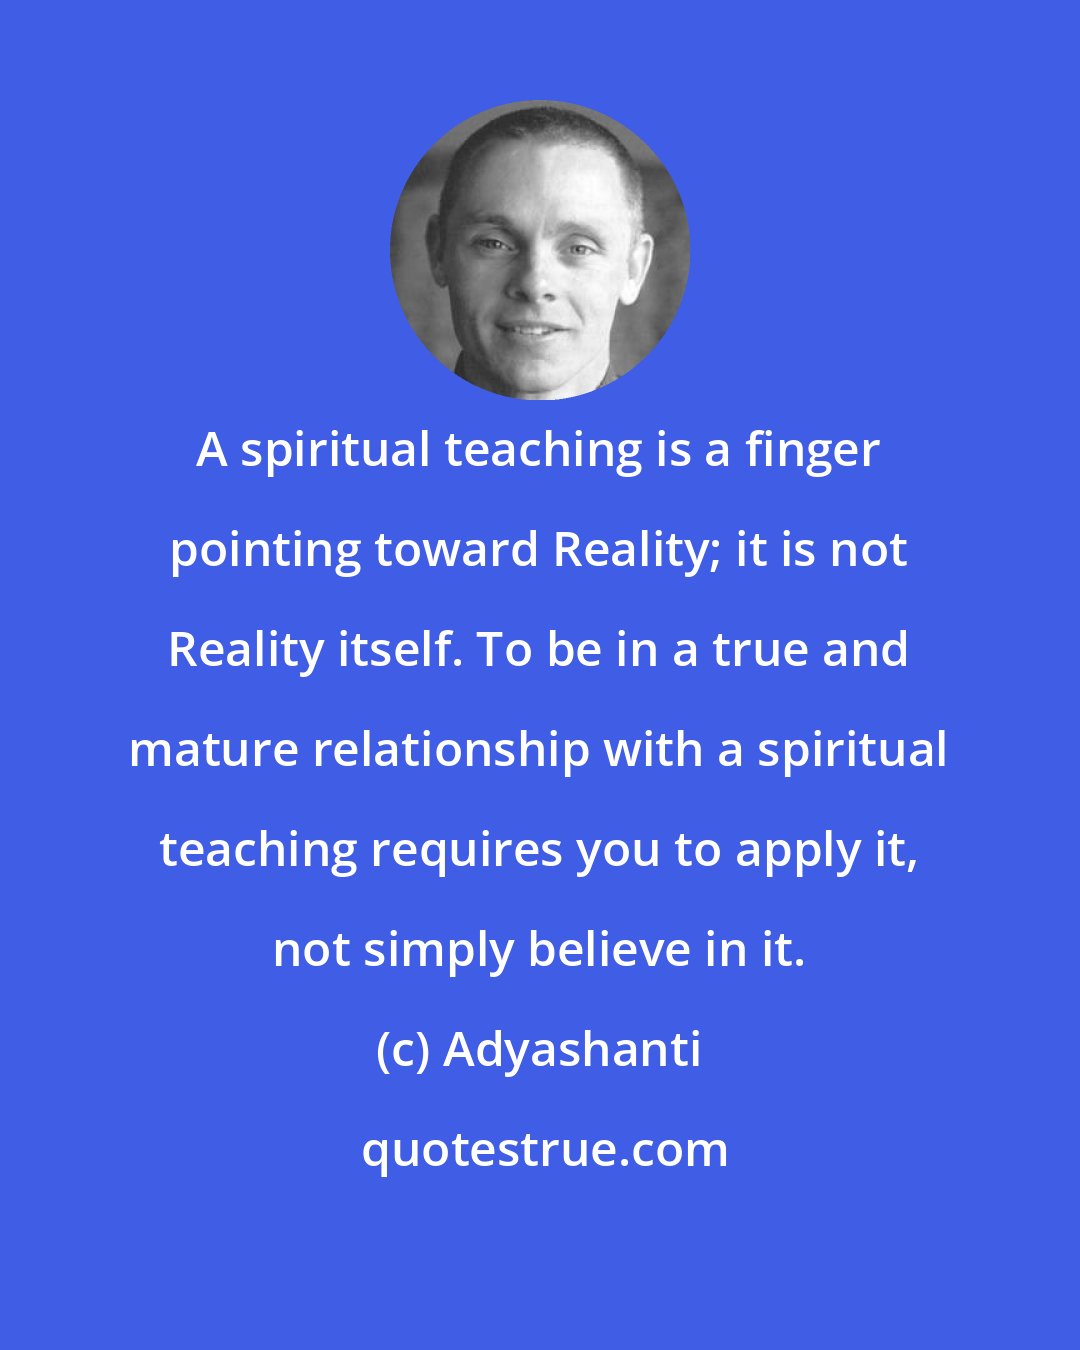 Adyashanti: A spiritual teaching is a finger pointing toward Reality; it is not Reality itself. To be in a true and mature relationship with a spiritual teaching requires you to apply it, not simply believe in it.